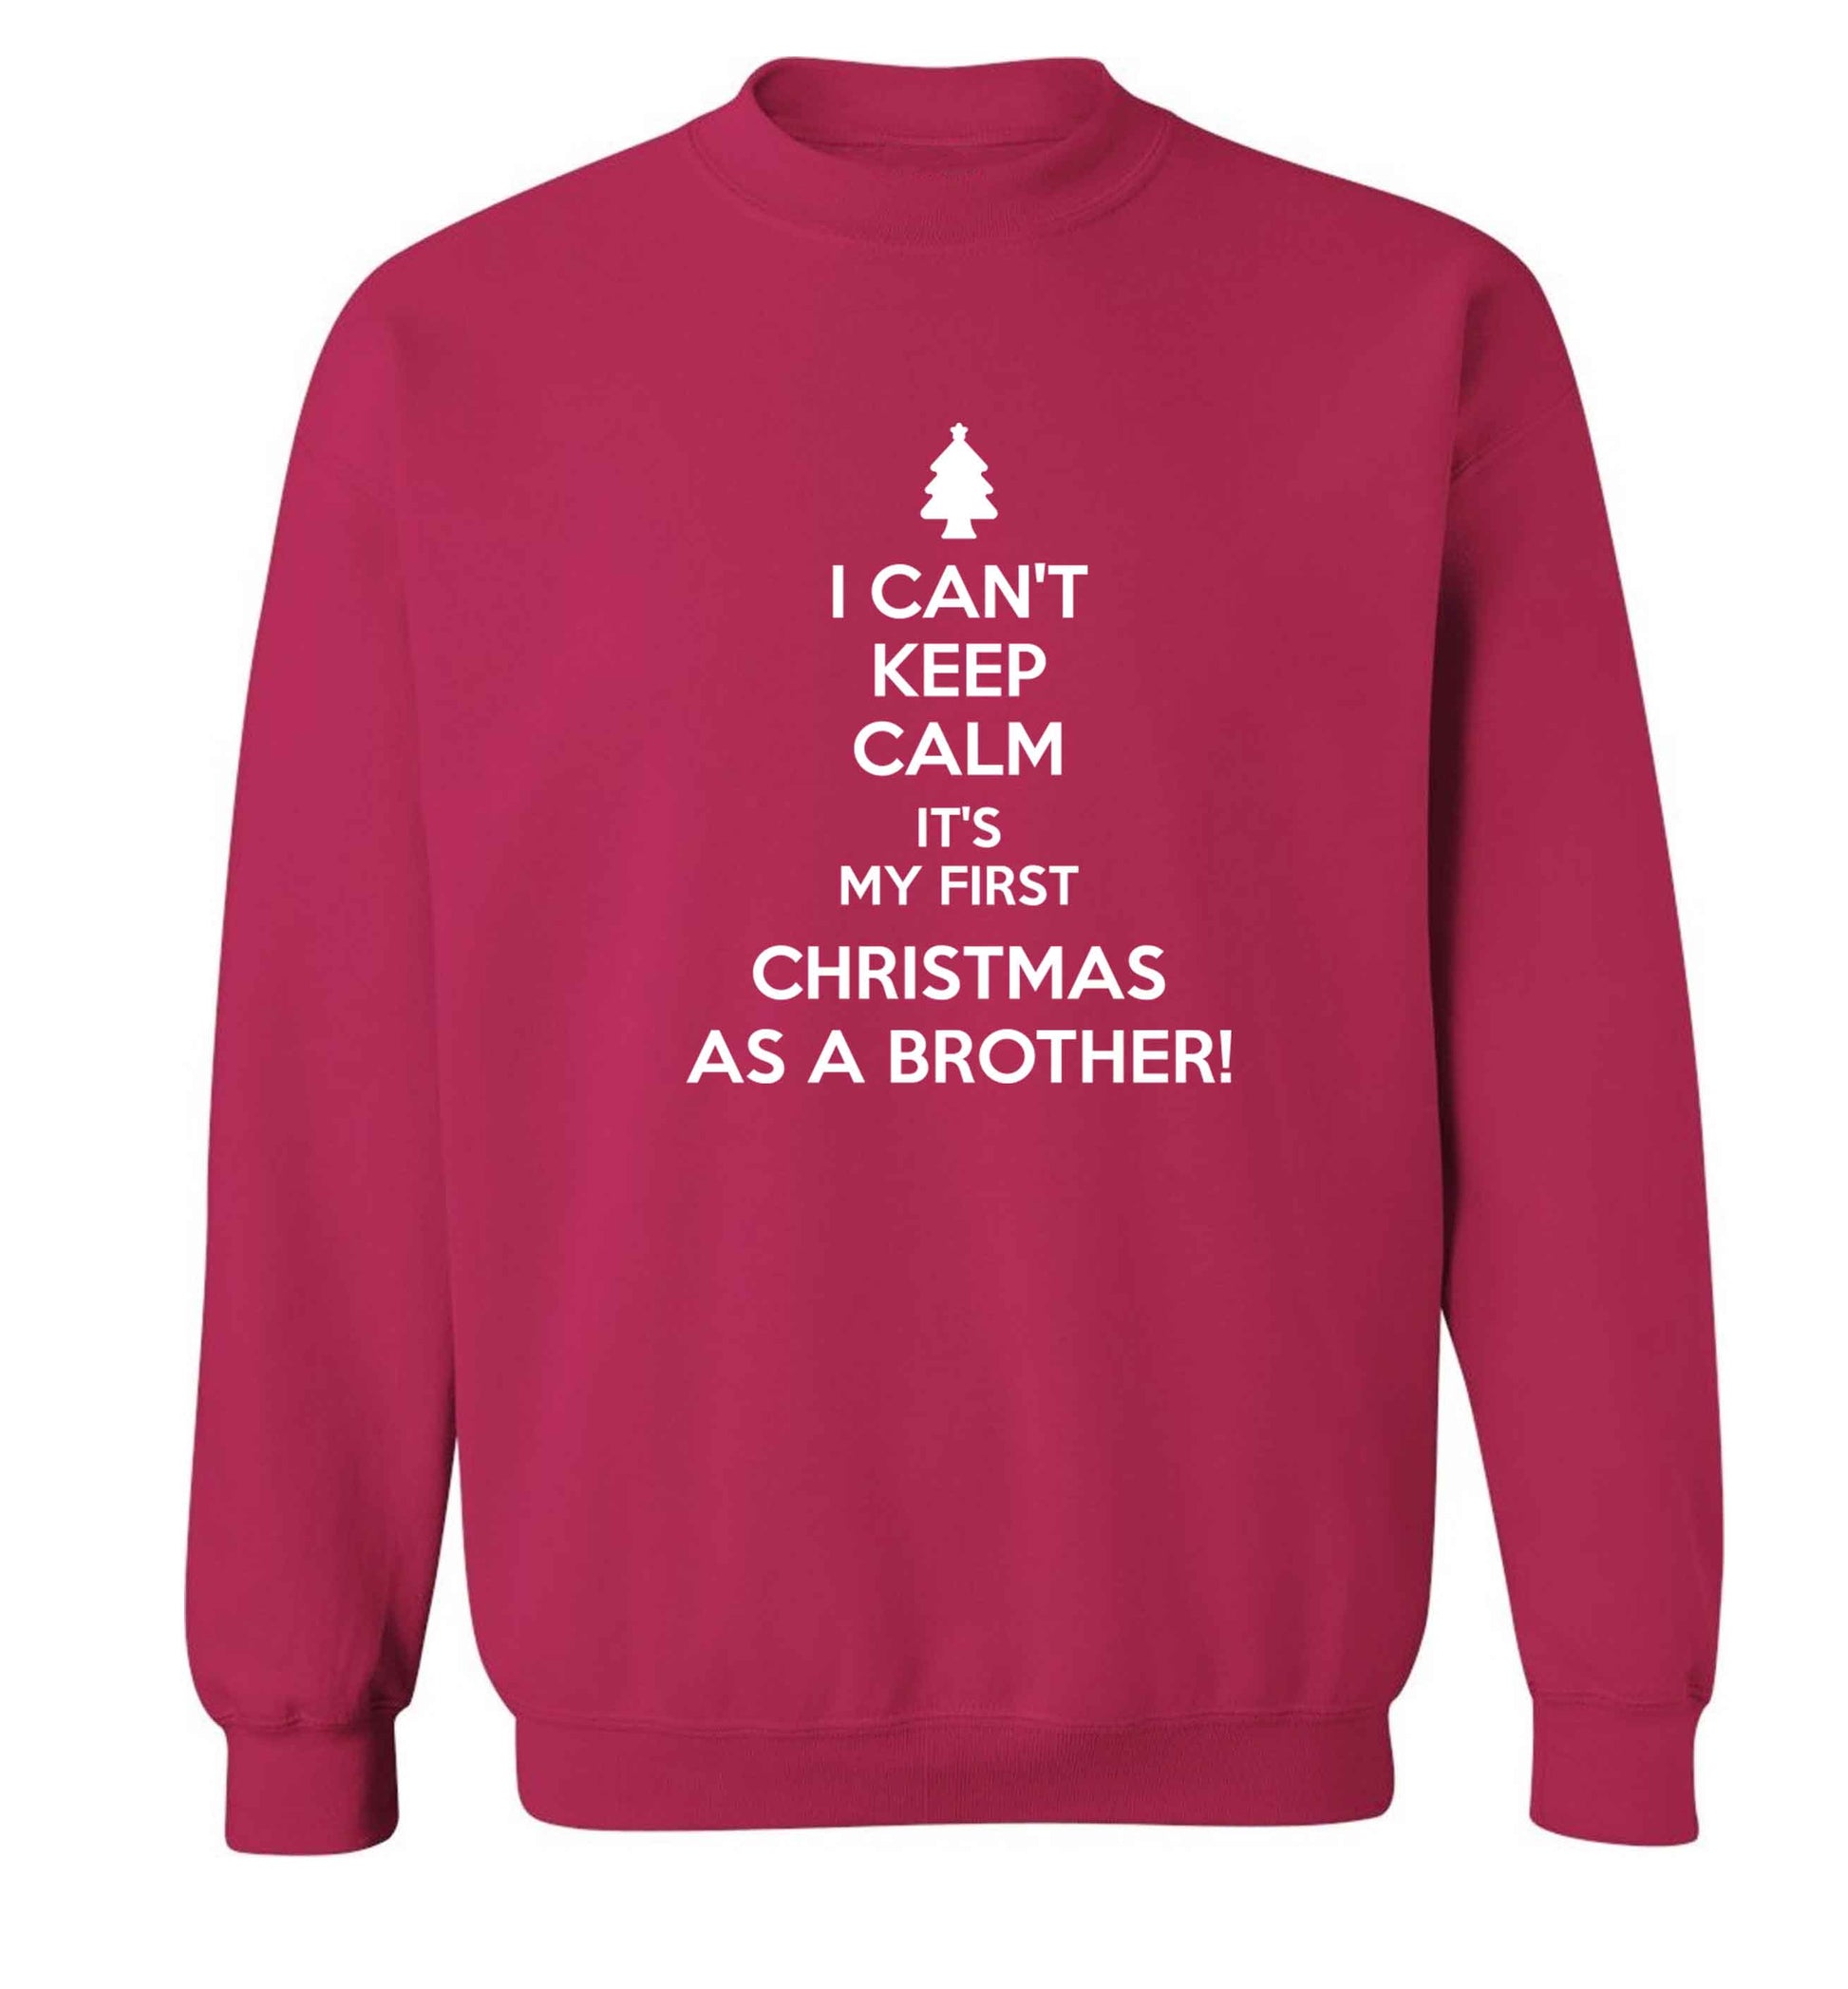 I can't keep calm it's my first Christmas as a brother! Adult's unisex pink Sweater 2XL